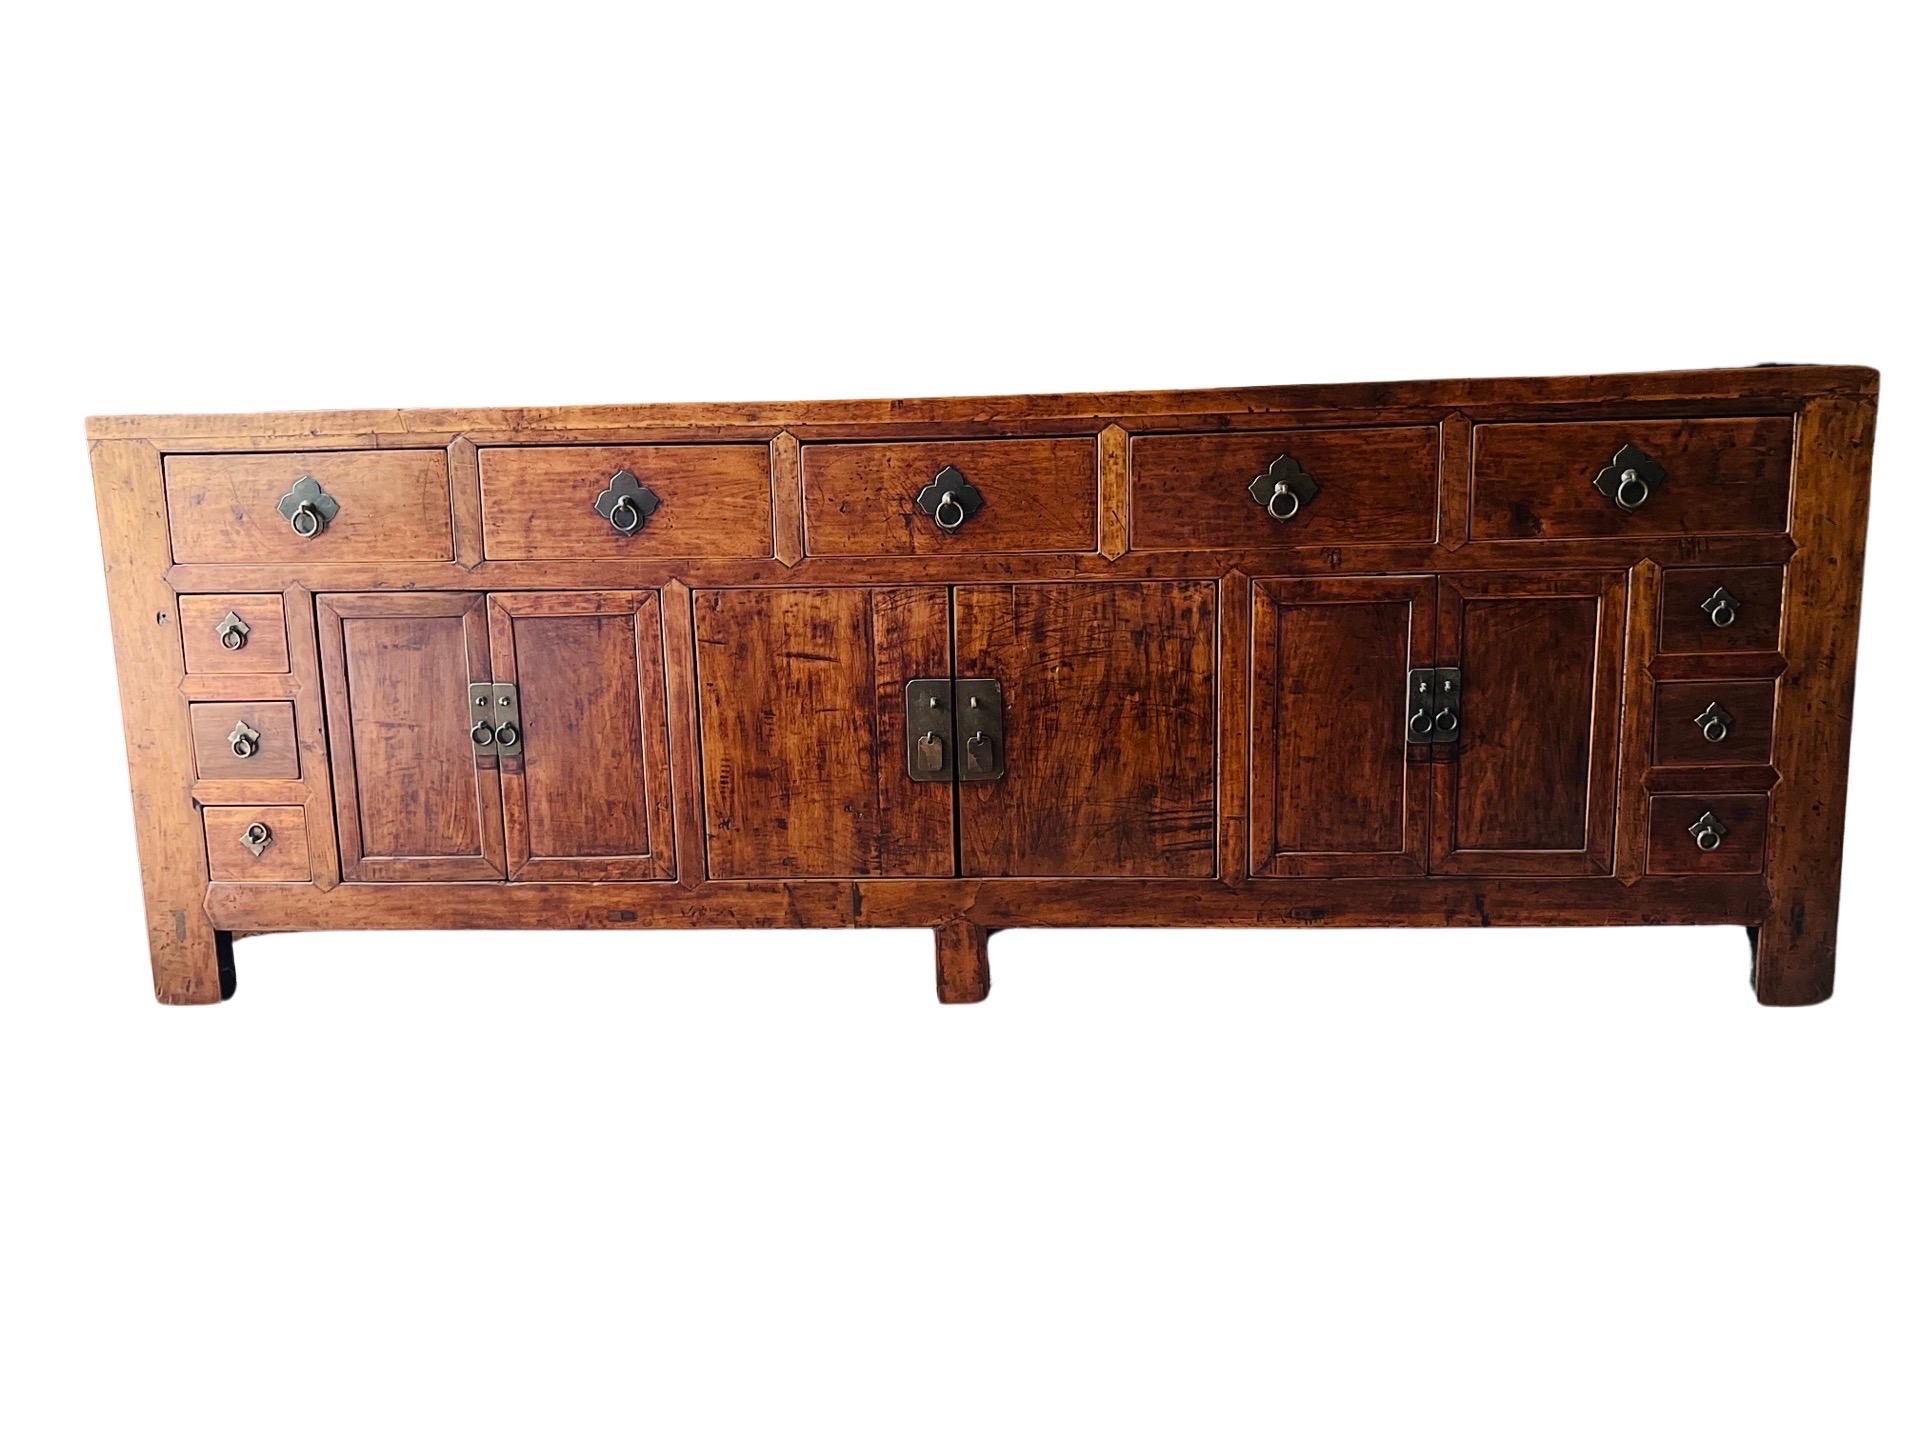 19th C. Monumental & Important Qing Dynasty Chinese Double Sided Sideboard In Good Condition For Sale In Atlanta, GA